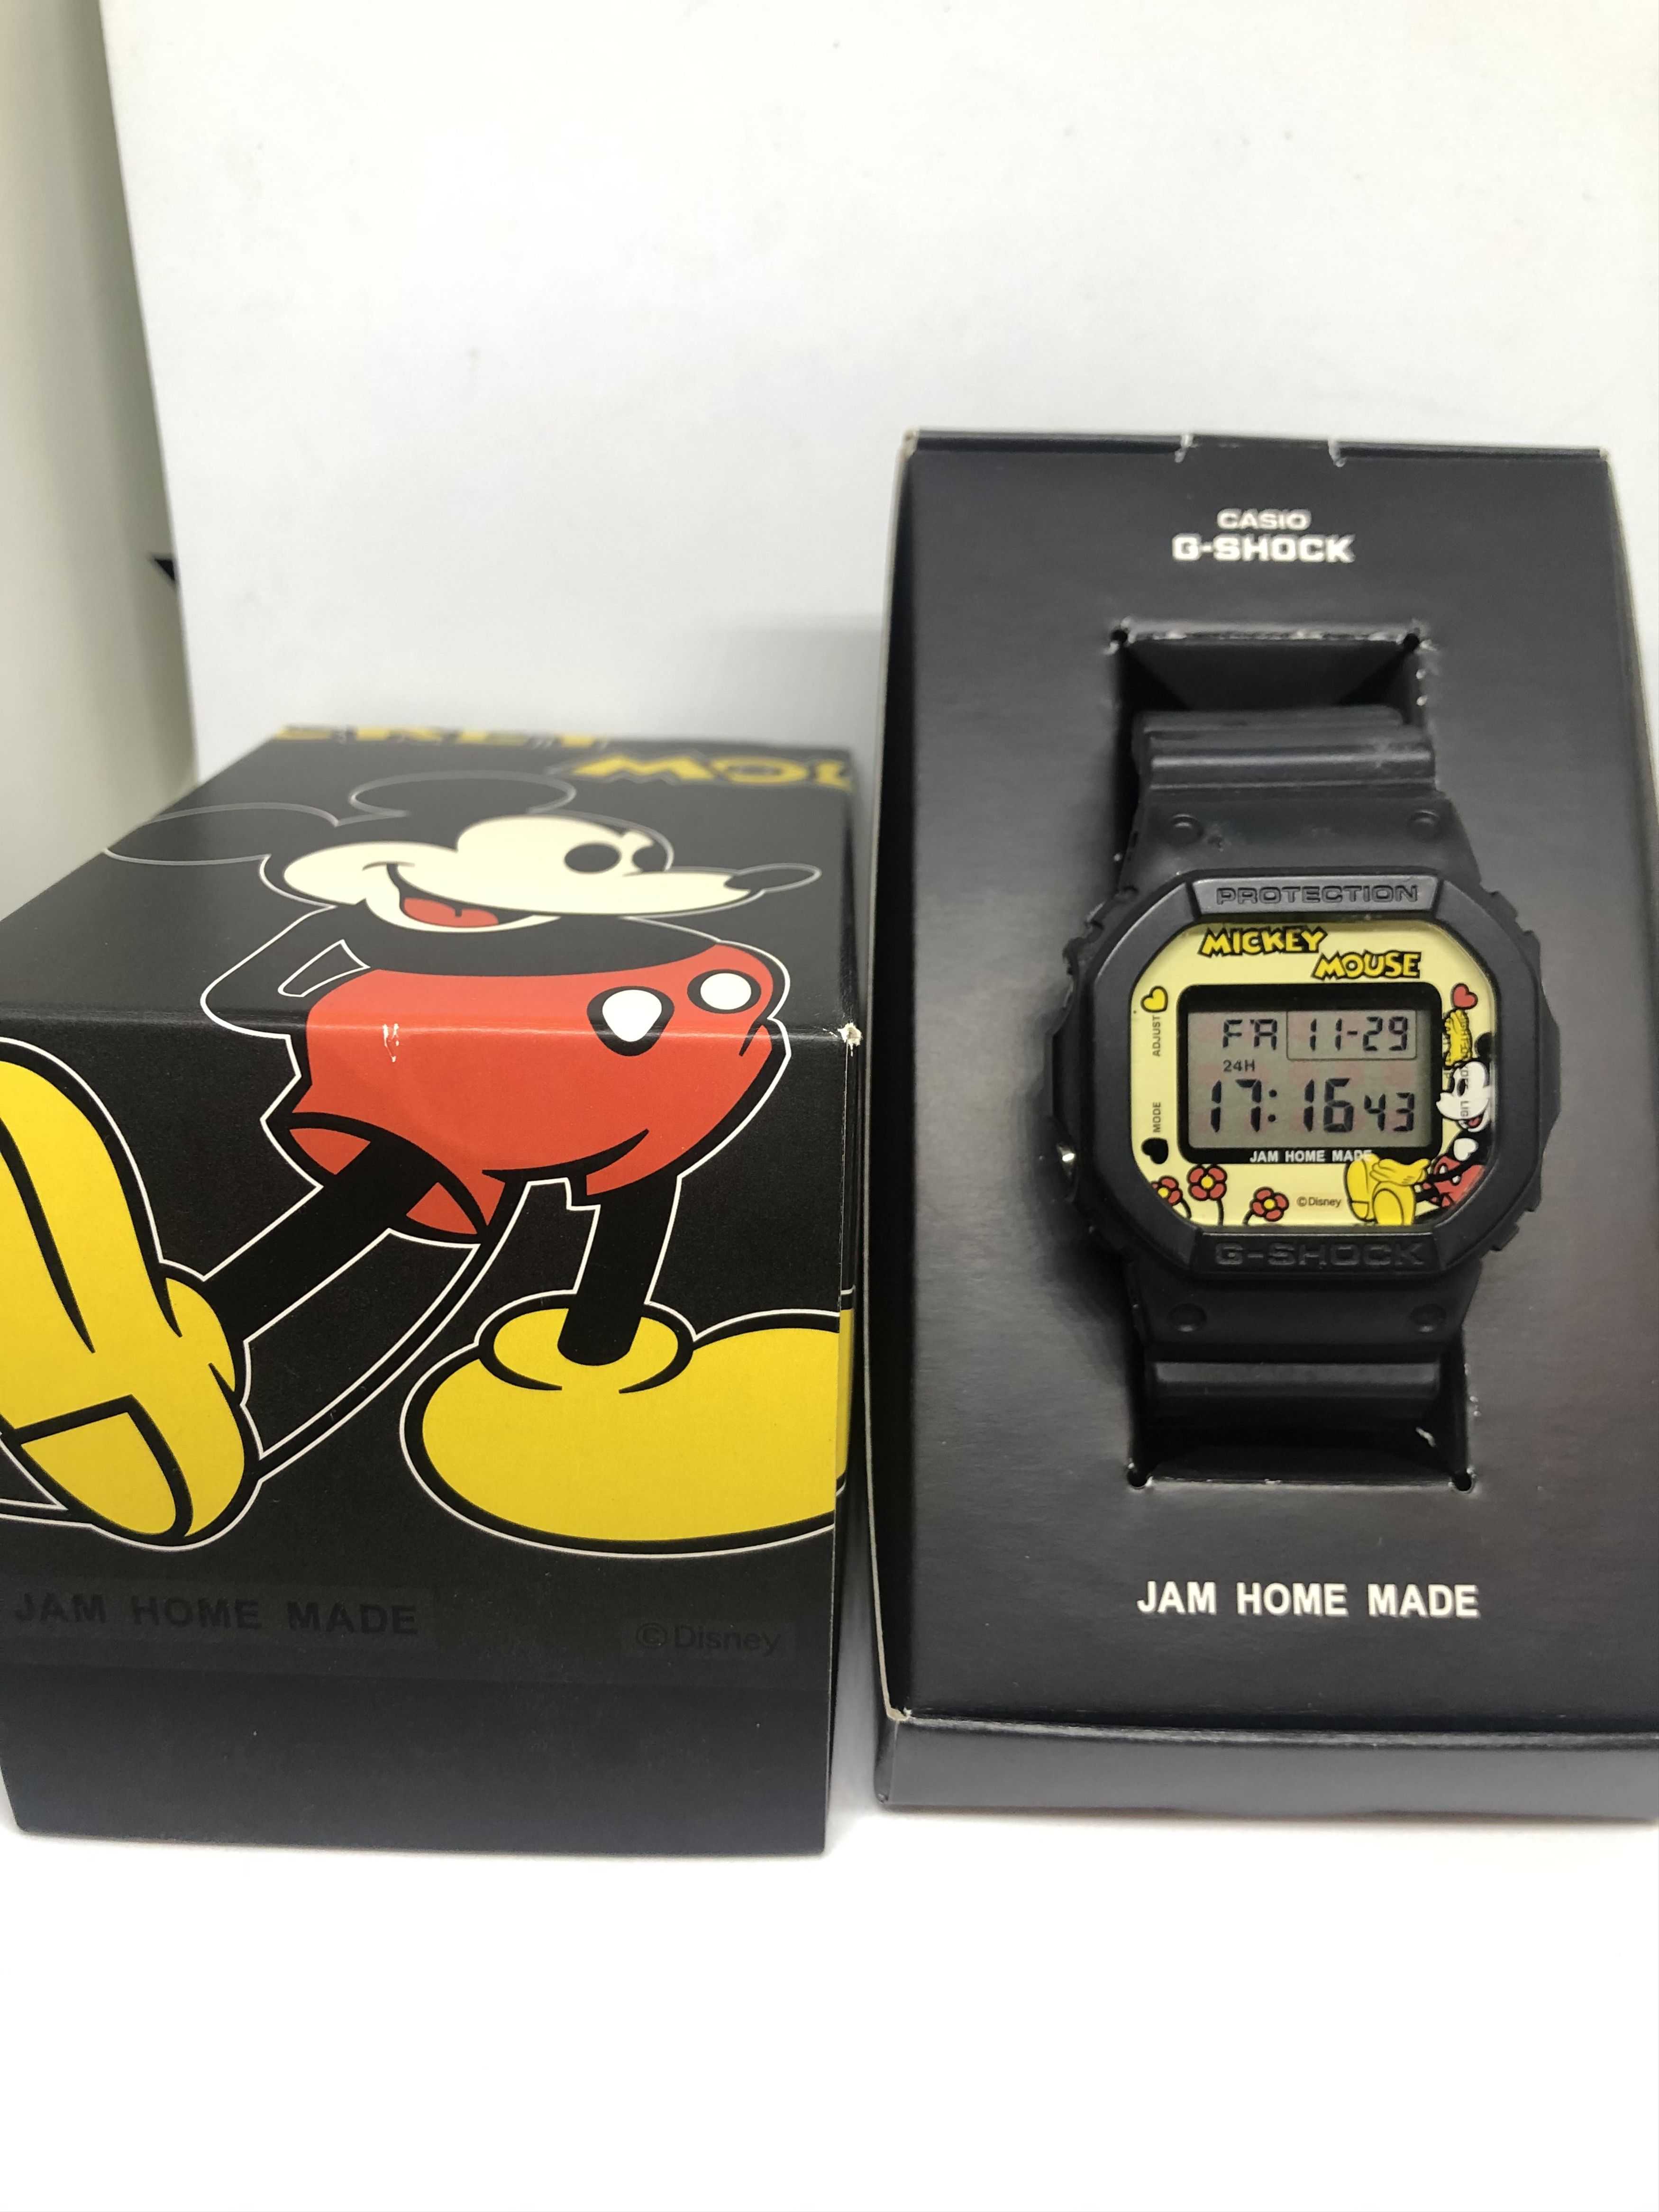 G Shock G-Shock DW-5600VT x Jam Home Made x Limited Edition | Grailed